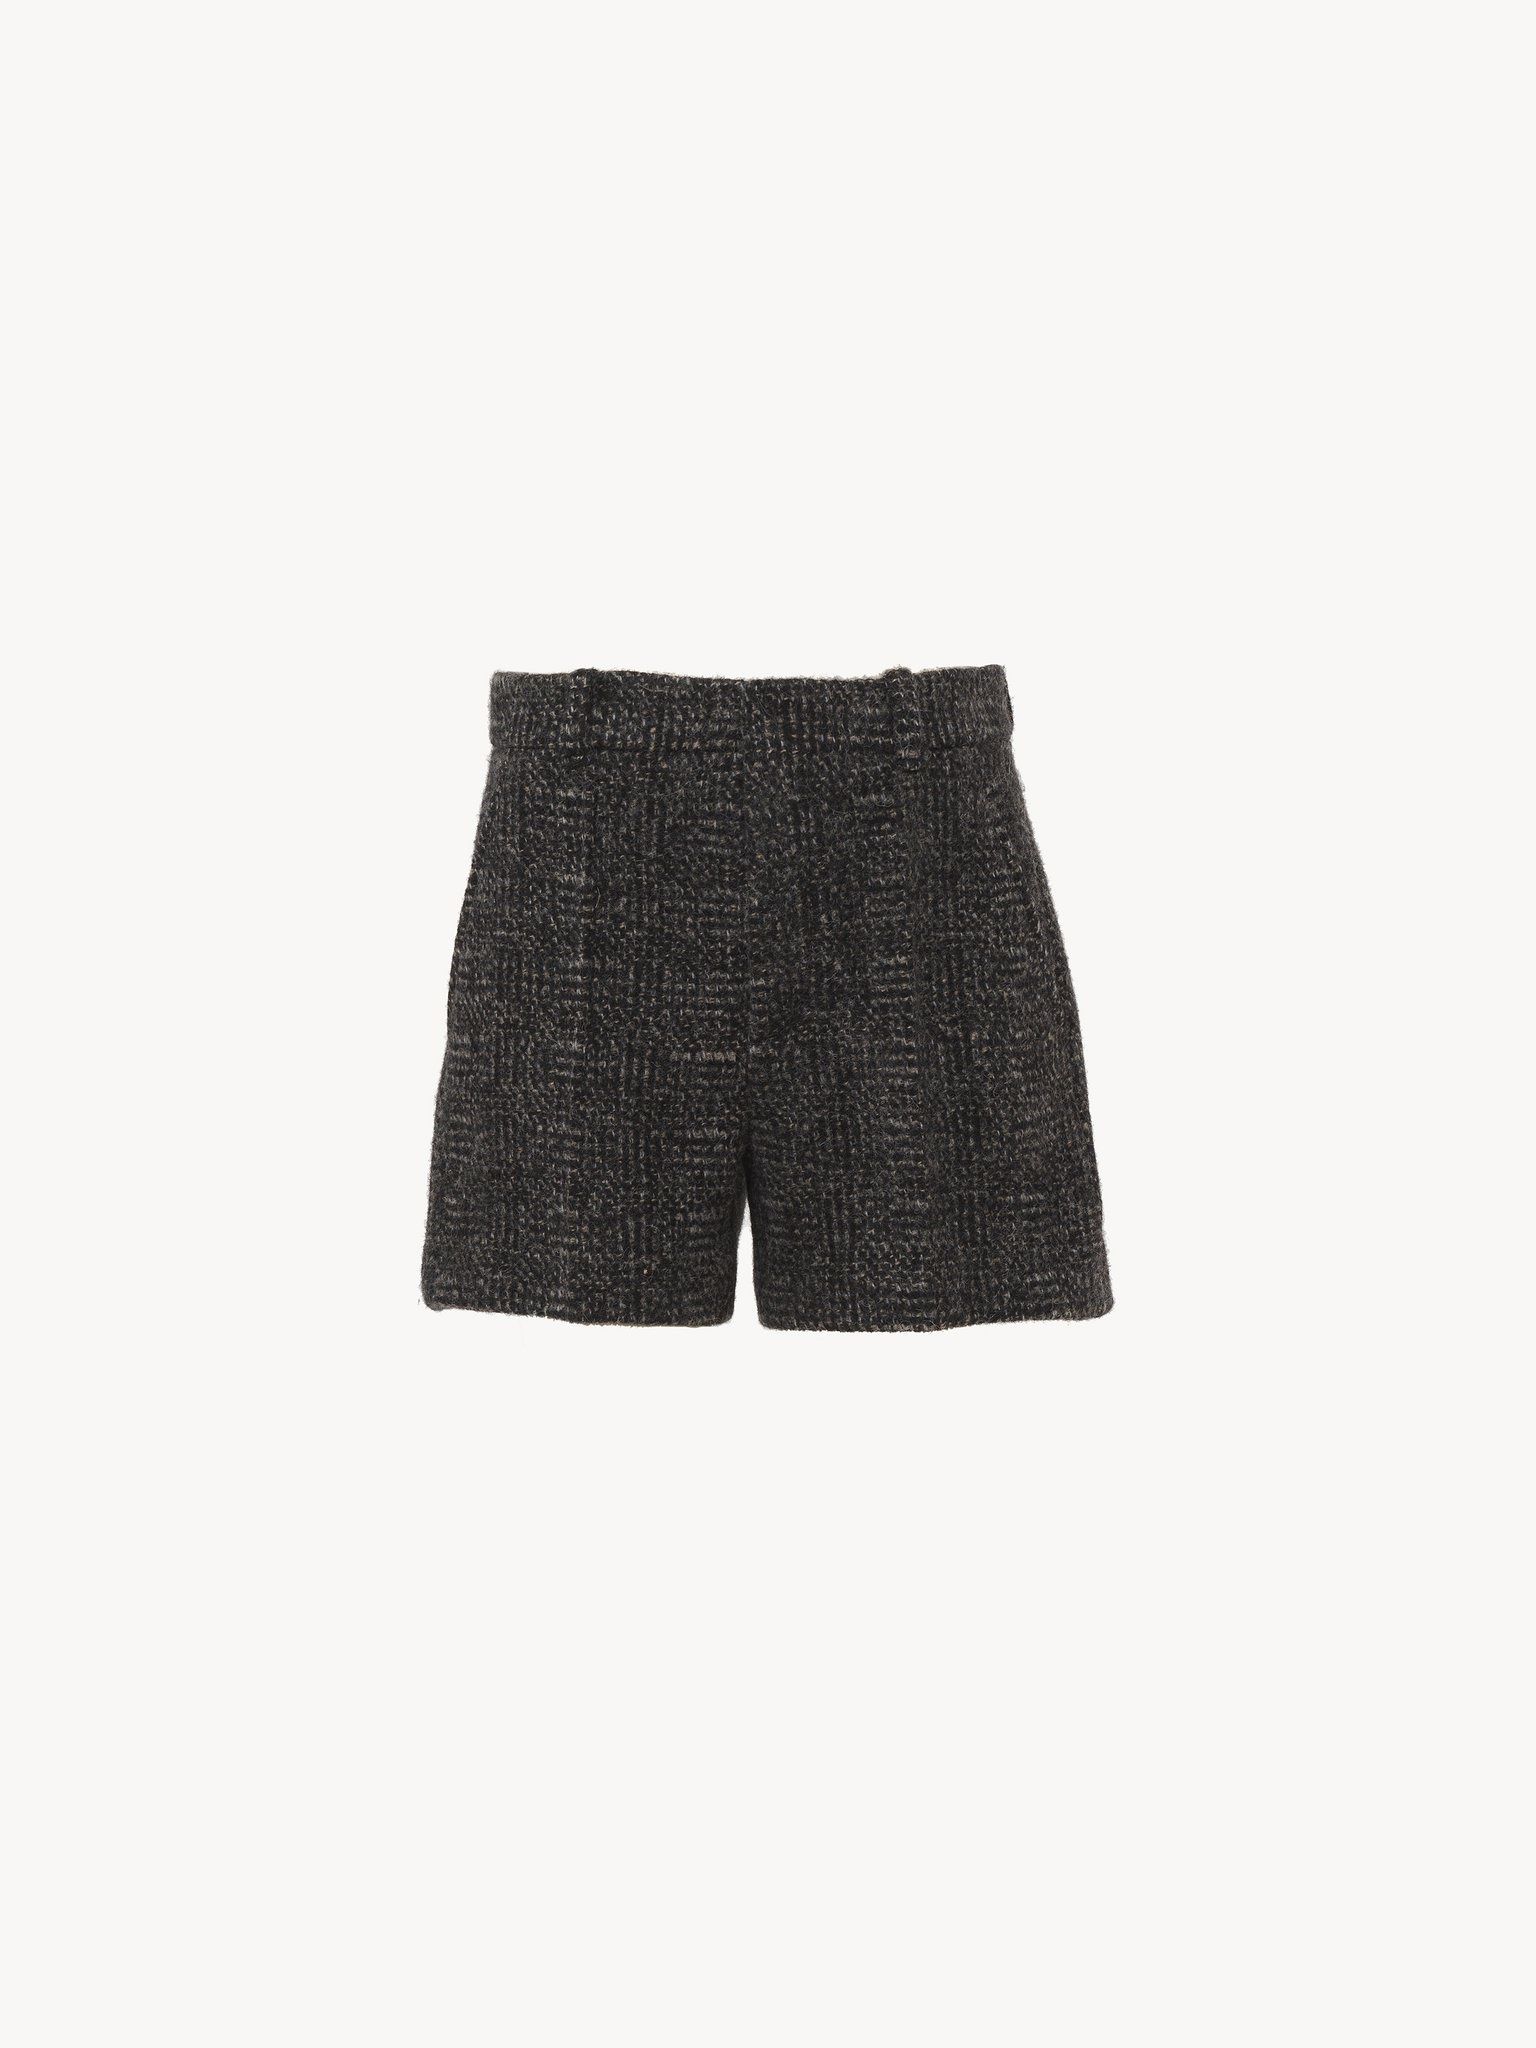 TAILORED SHORTS - 3